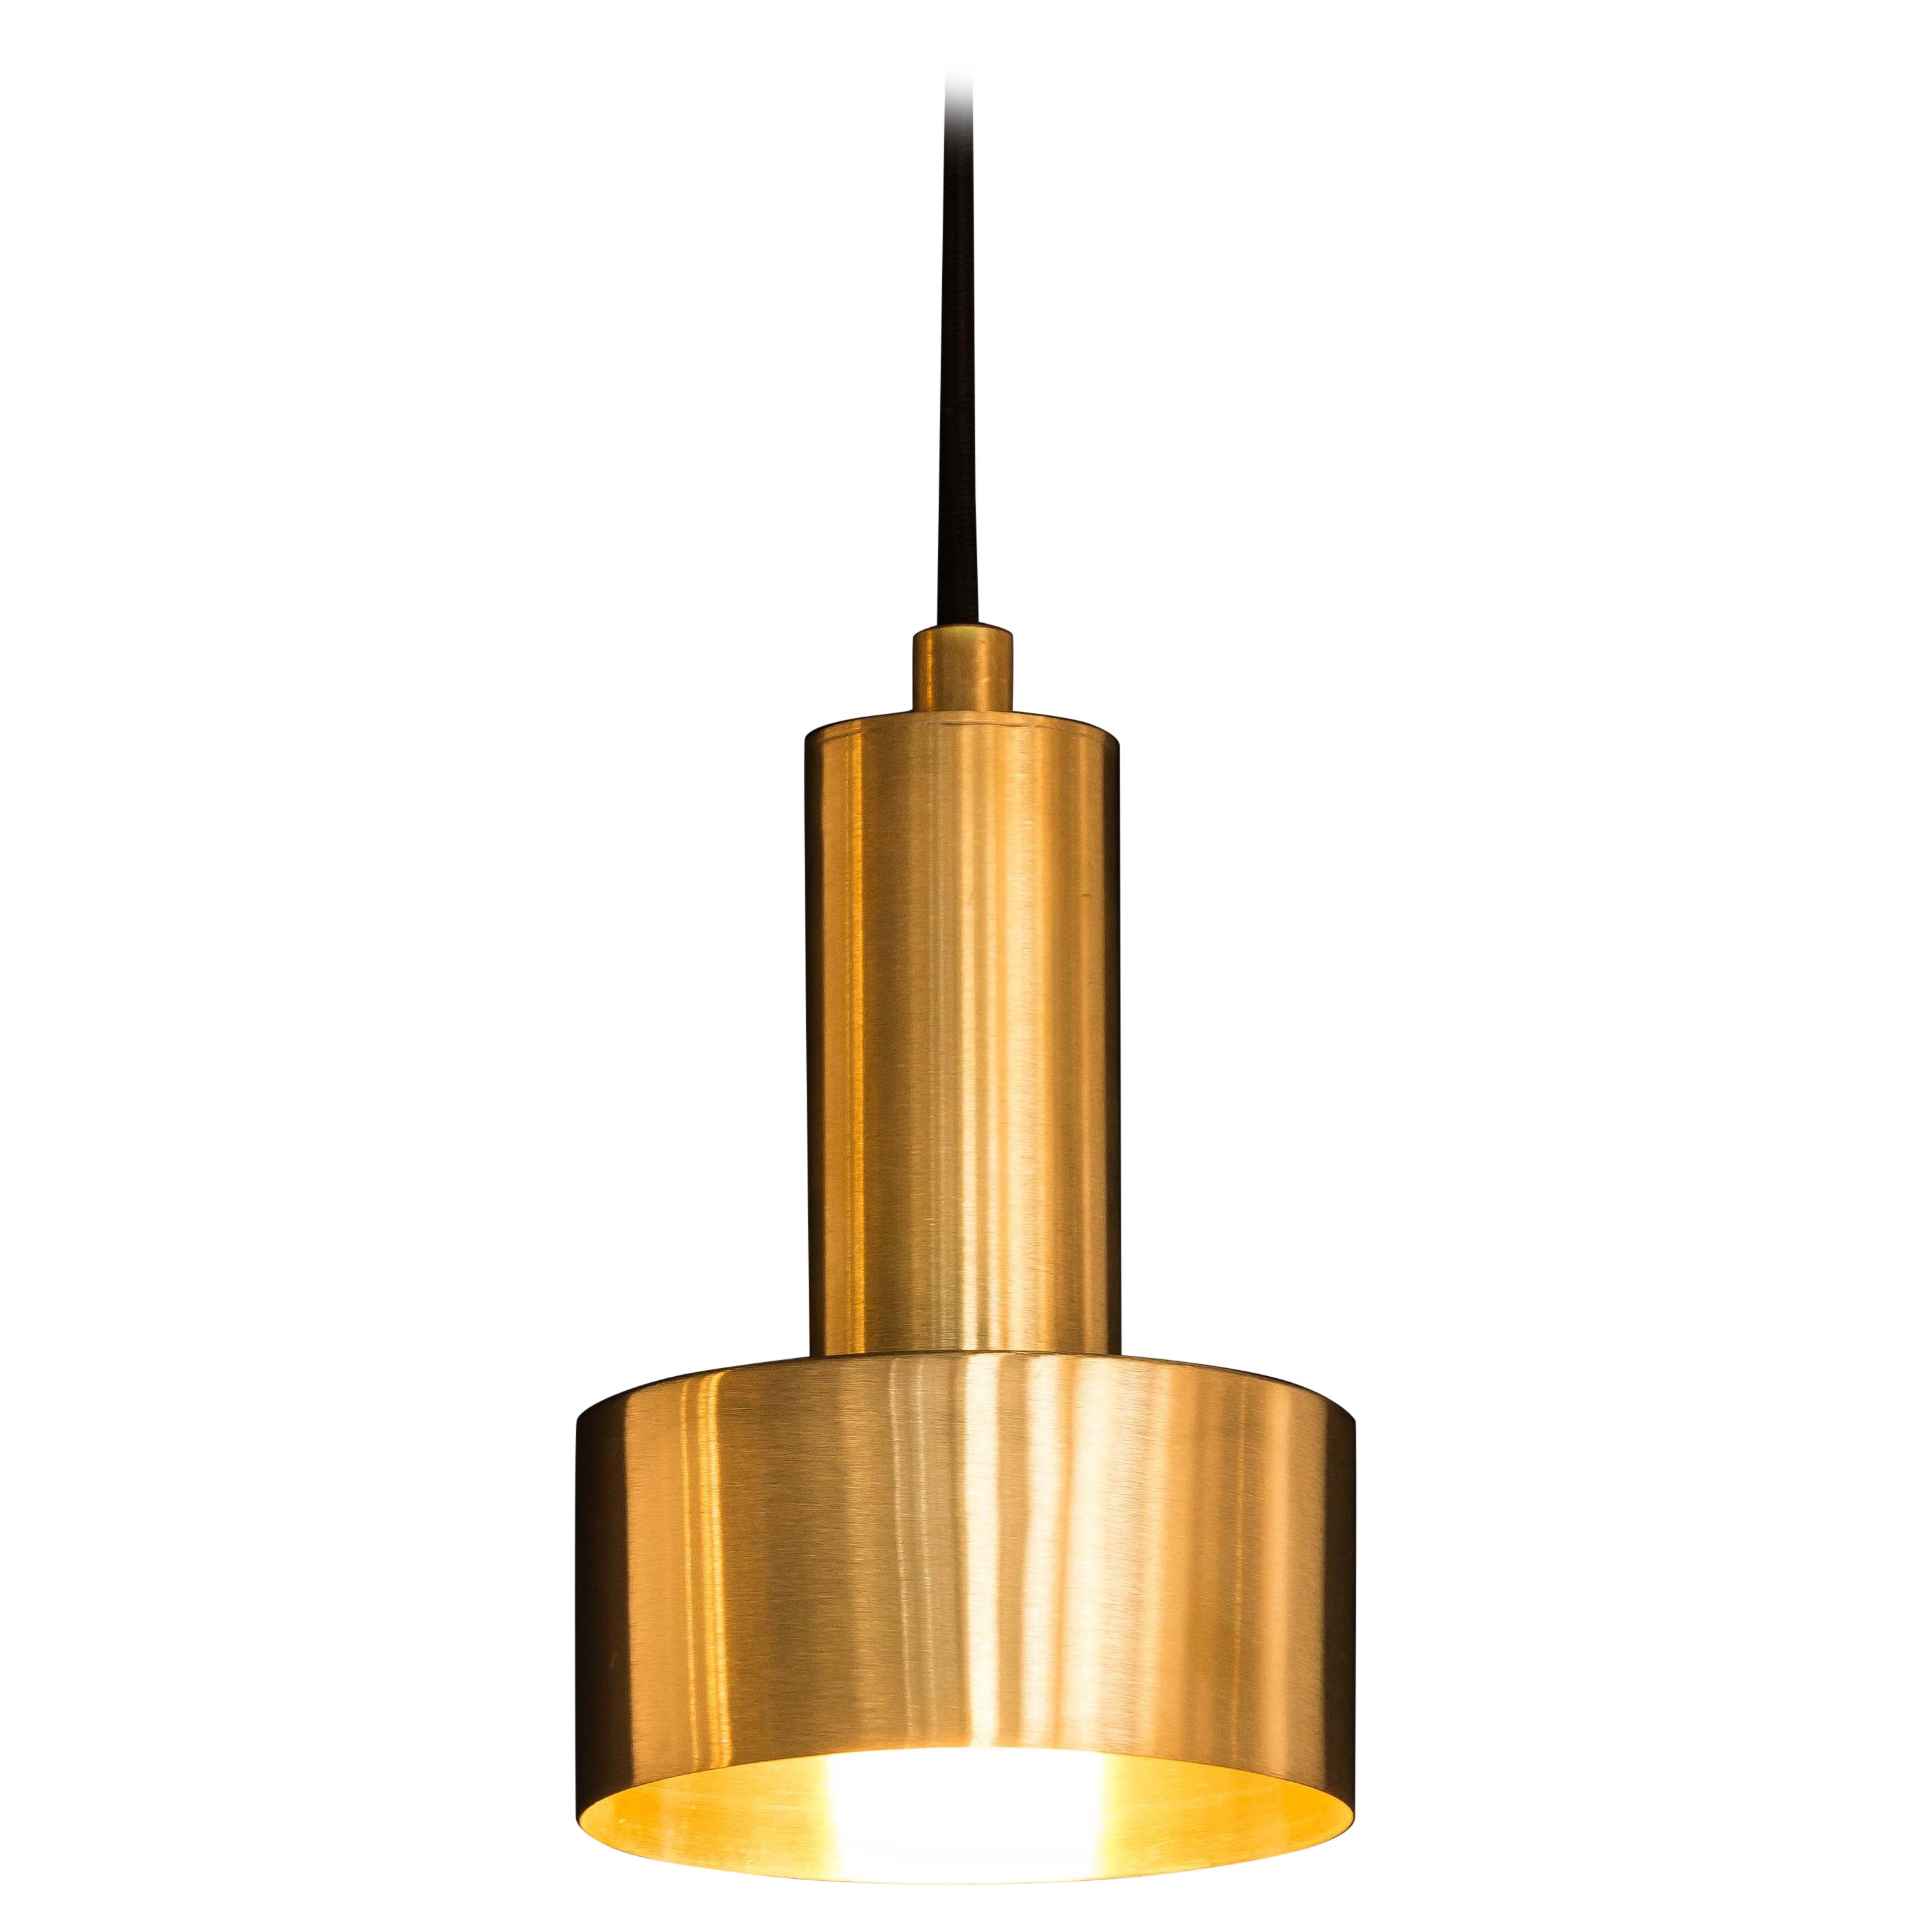 Natural Brass Contemporary-Modern Pendant Light Handcrafted in Italy by 247lab